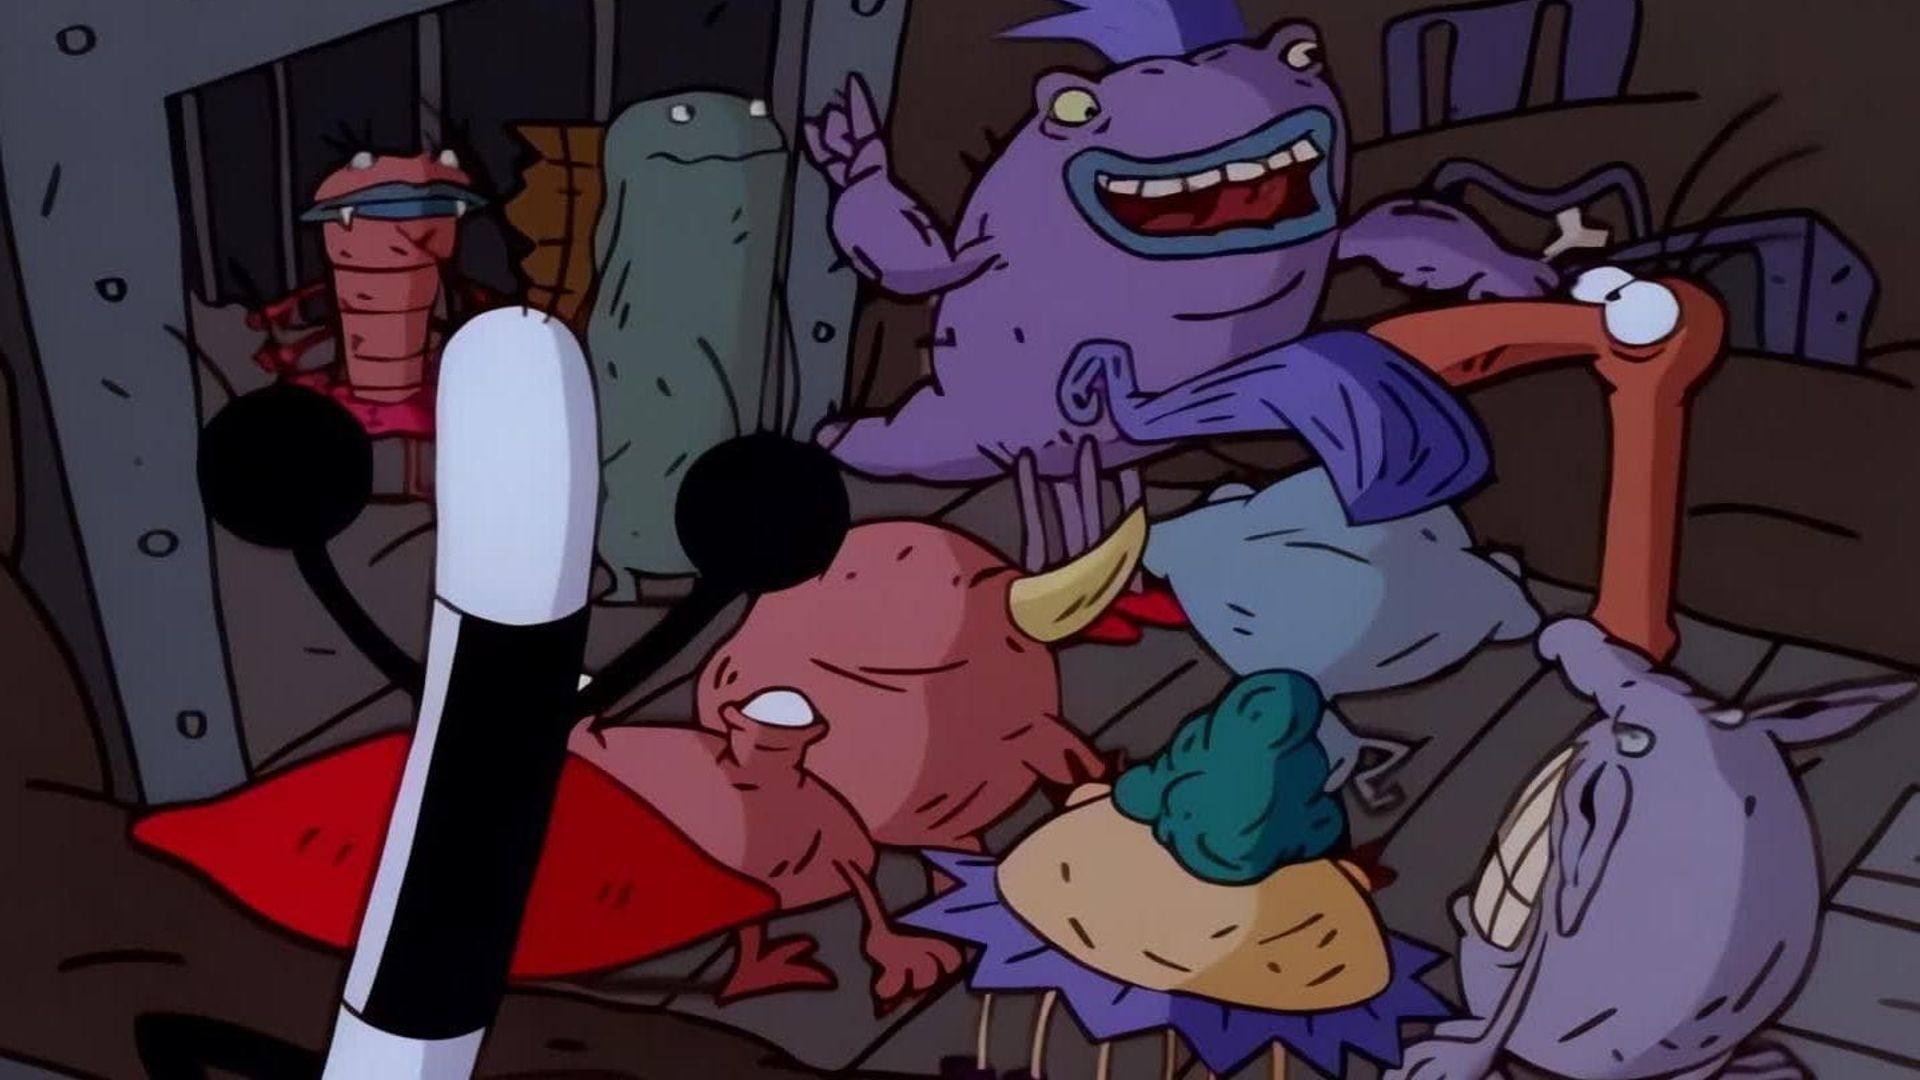 Aaahh!!! Real Monsters background